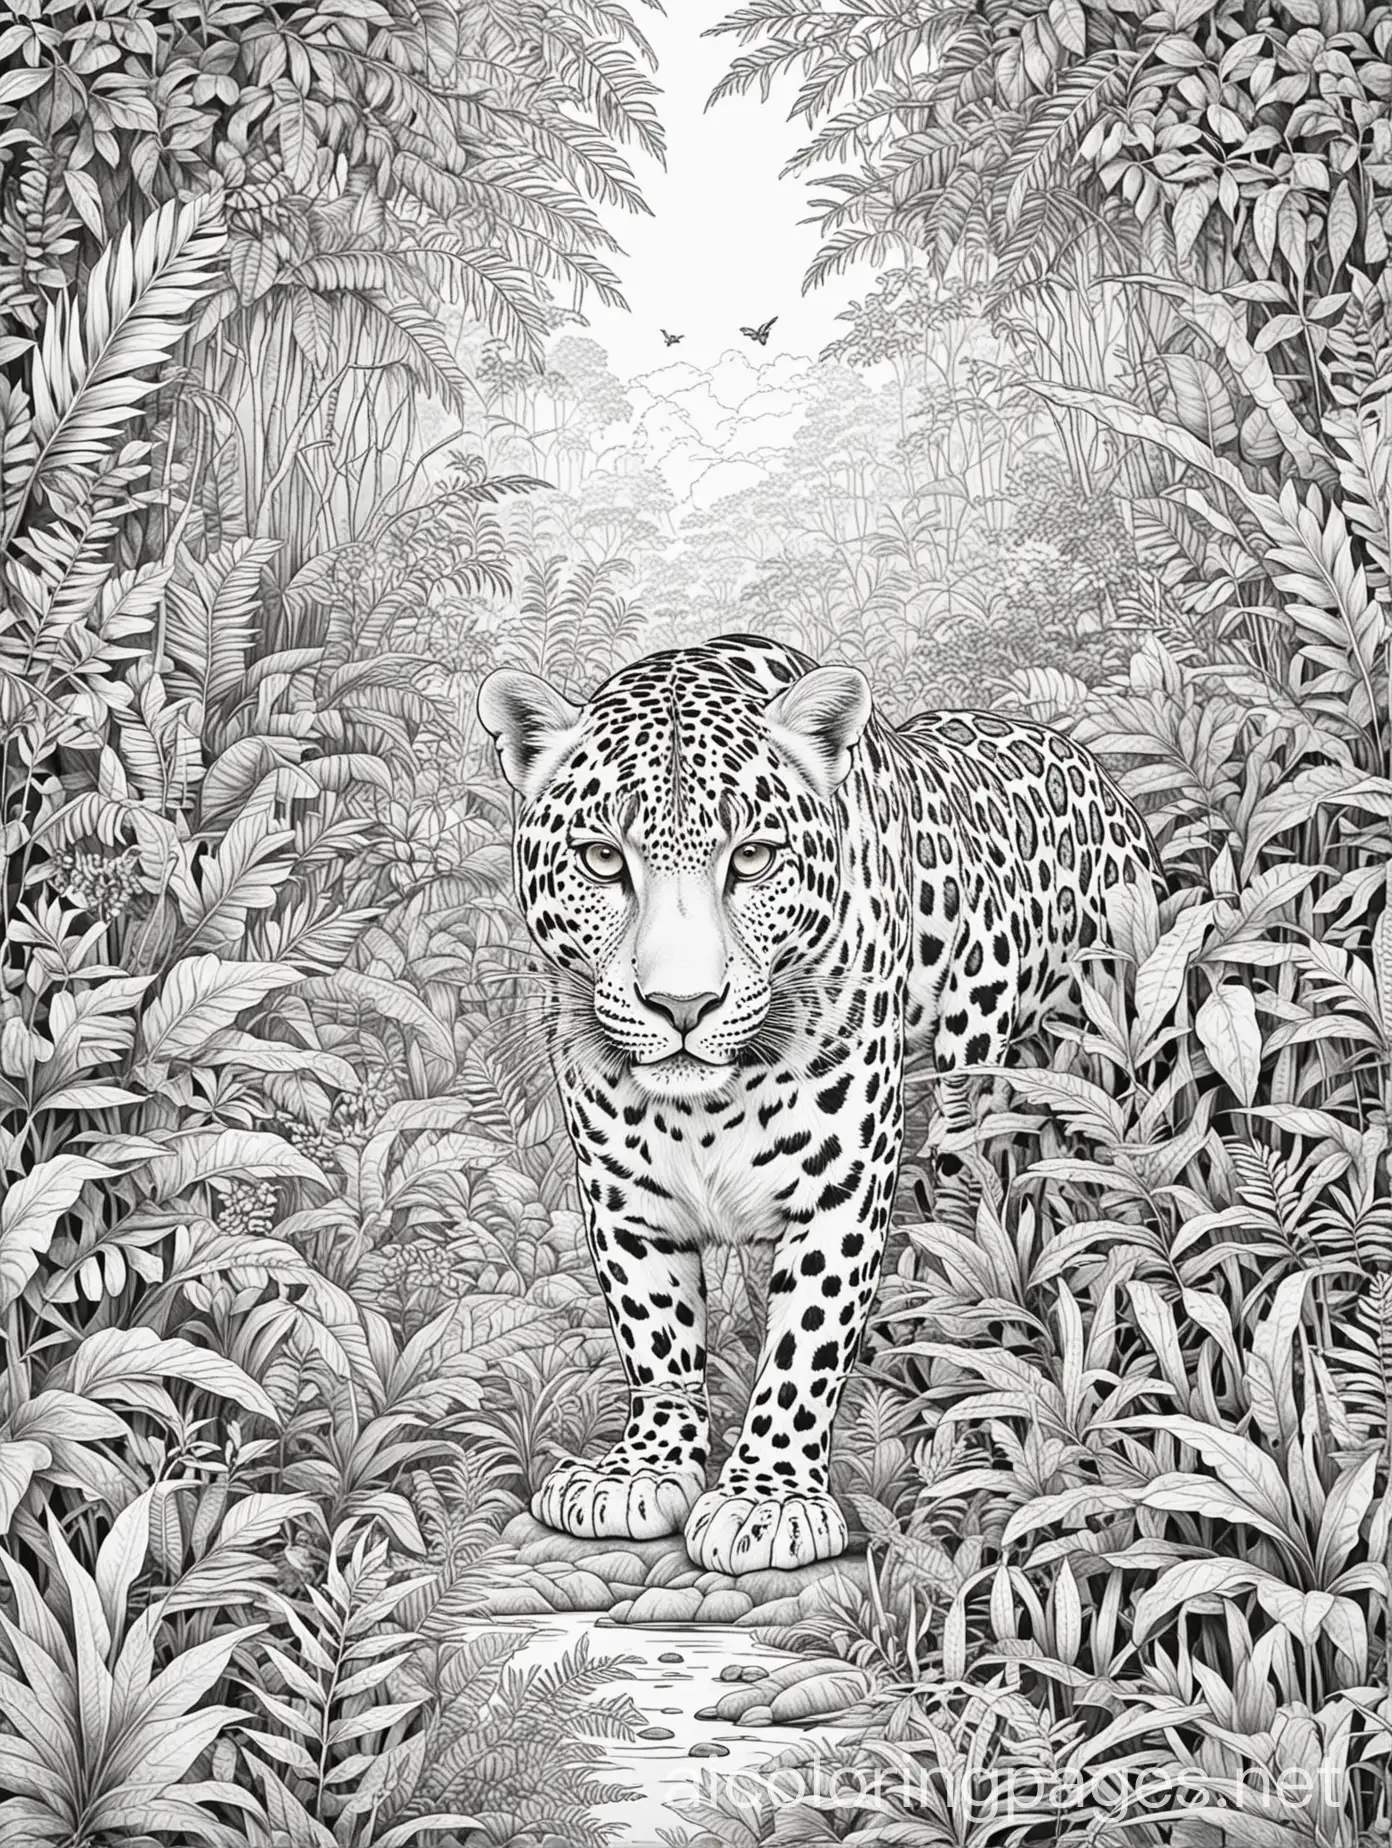 Leopard-Jungle-Coloring-Page-for-Kids-Lush-Plants-and-Wild-Animals